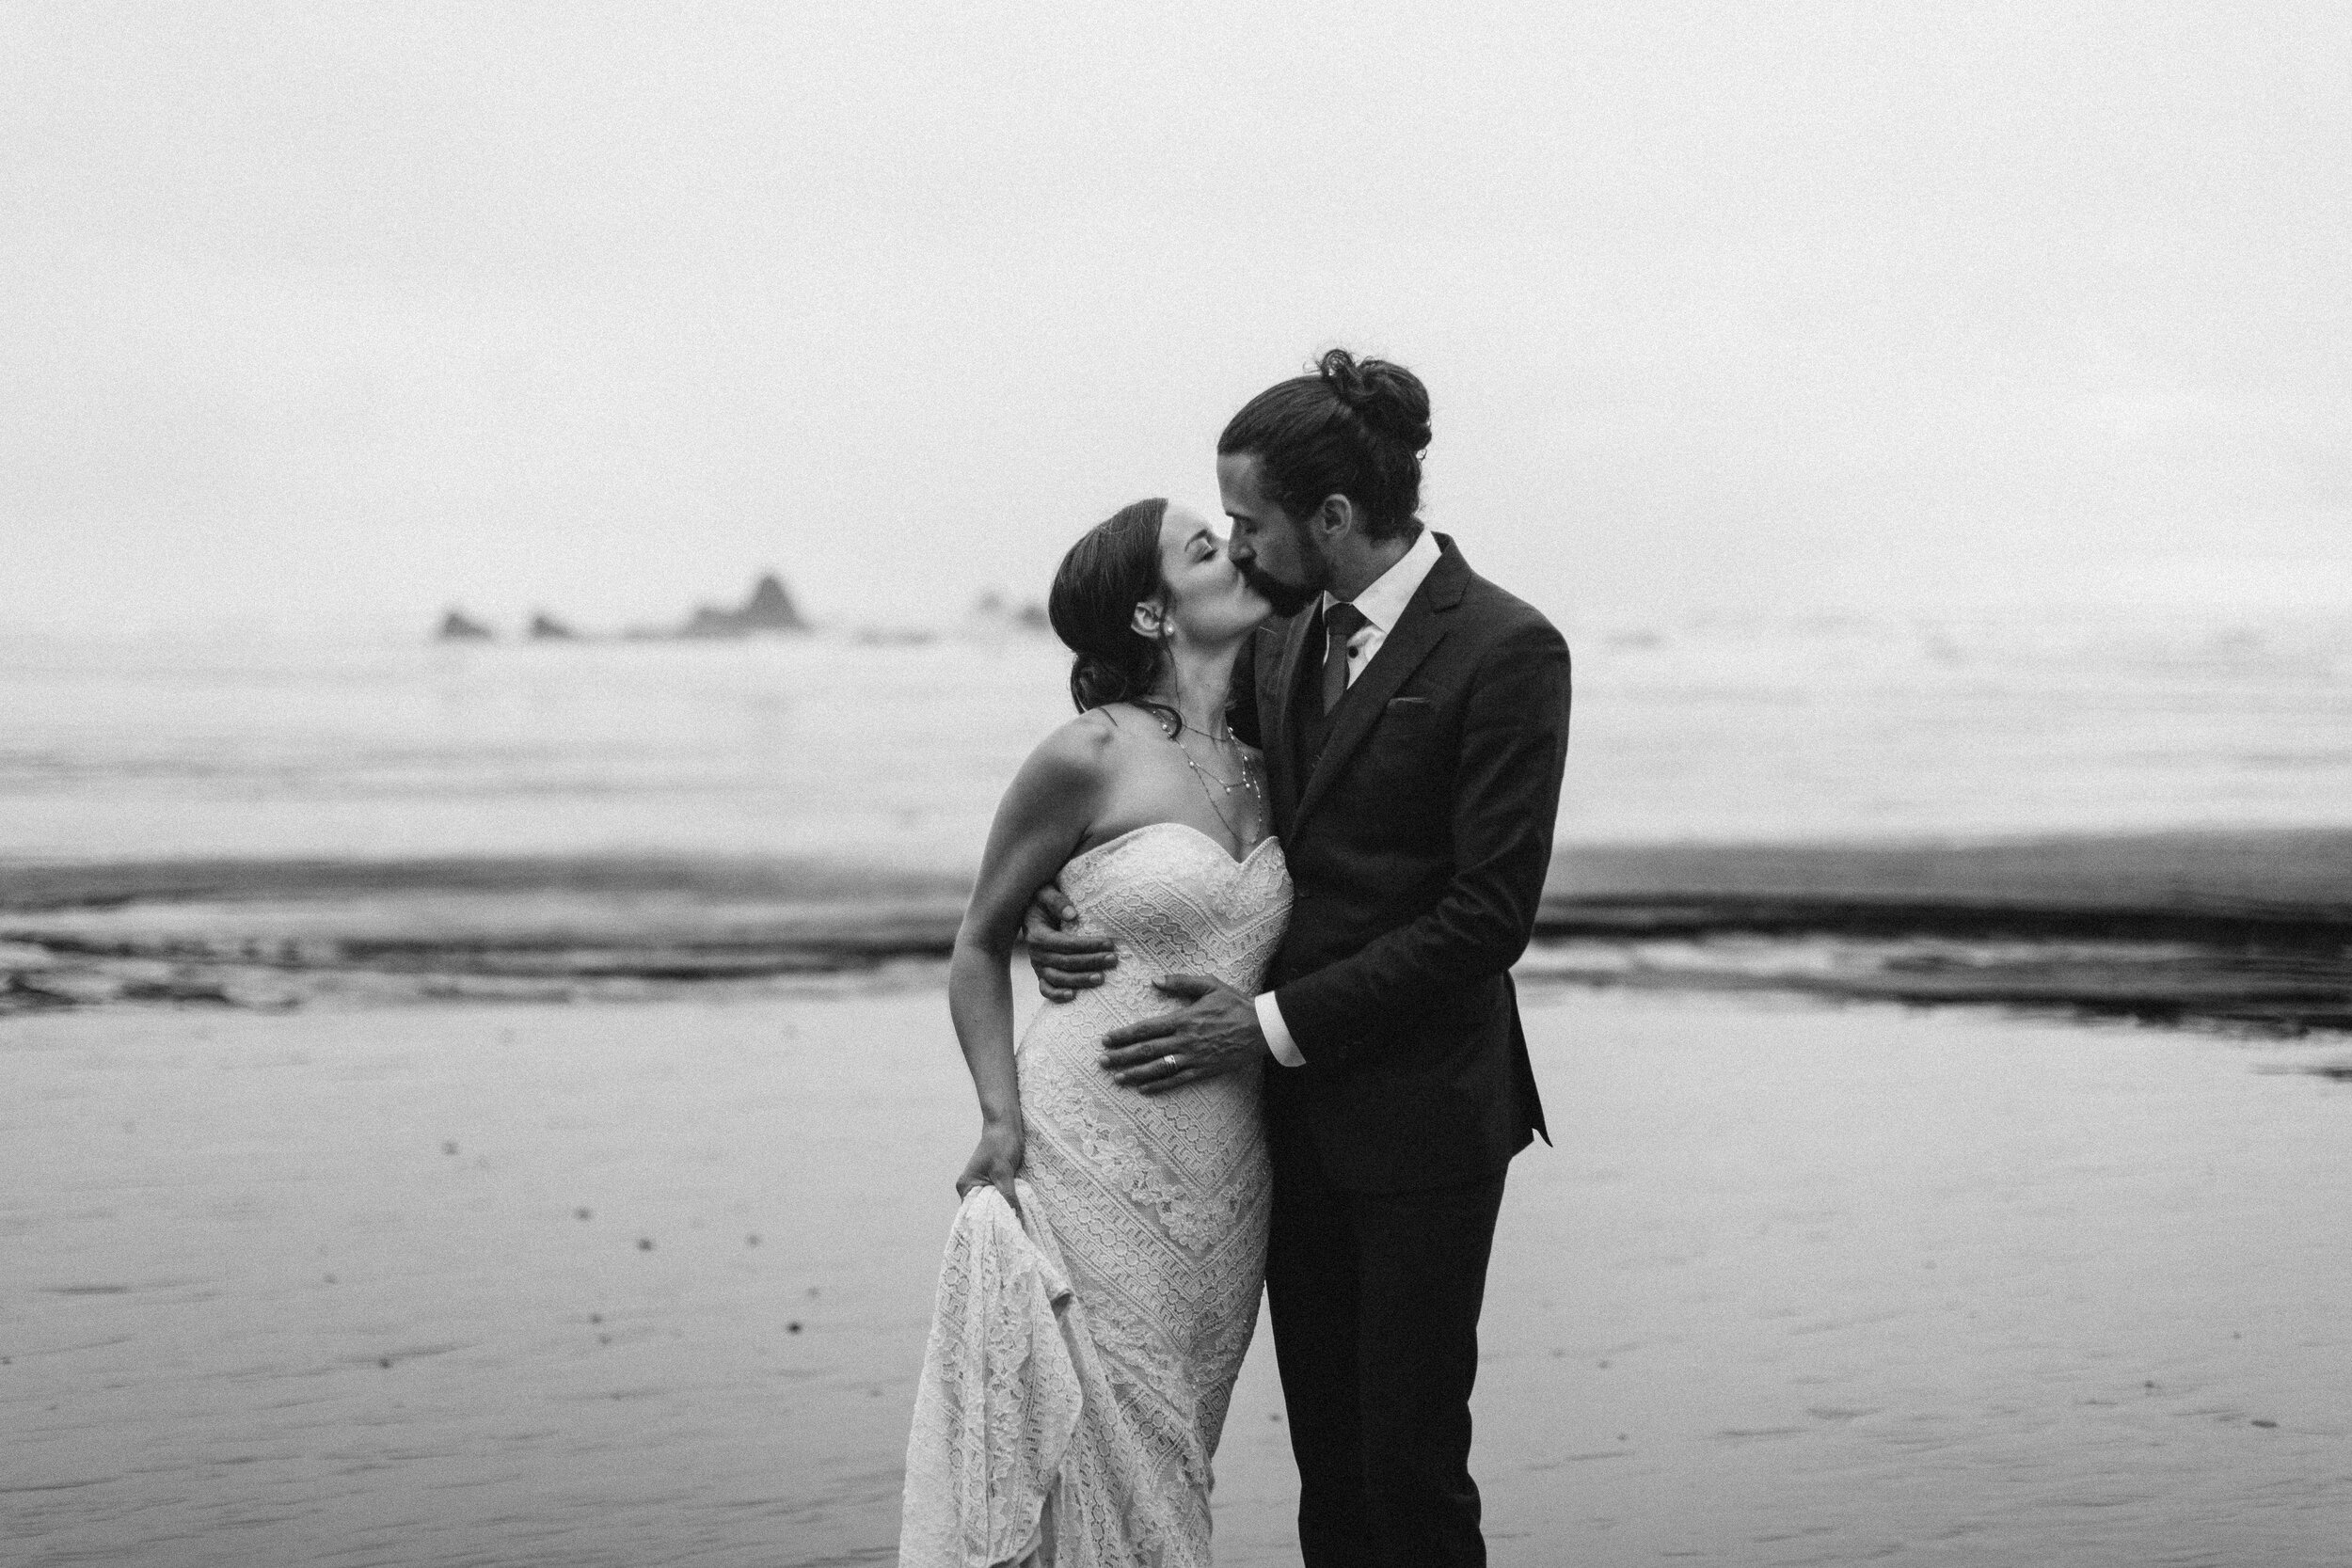 Nicole-Daacke-Photography-Olympic-national-park-elopement-photography-intimiate-elopement-in-olympic-peninsula-washington-state-rainy-day-ruby-beach-hoh-rainforest-elopement-inspiration-rainforest-pnw-elopement-photography-169.jpg